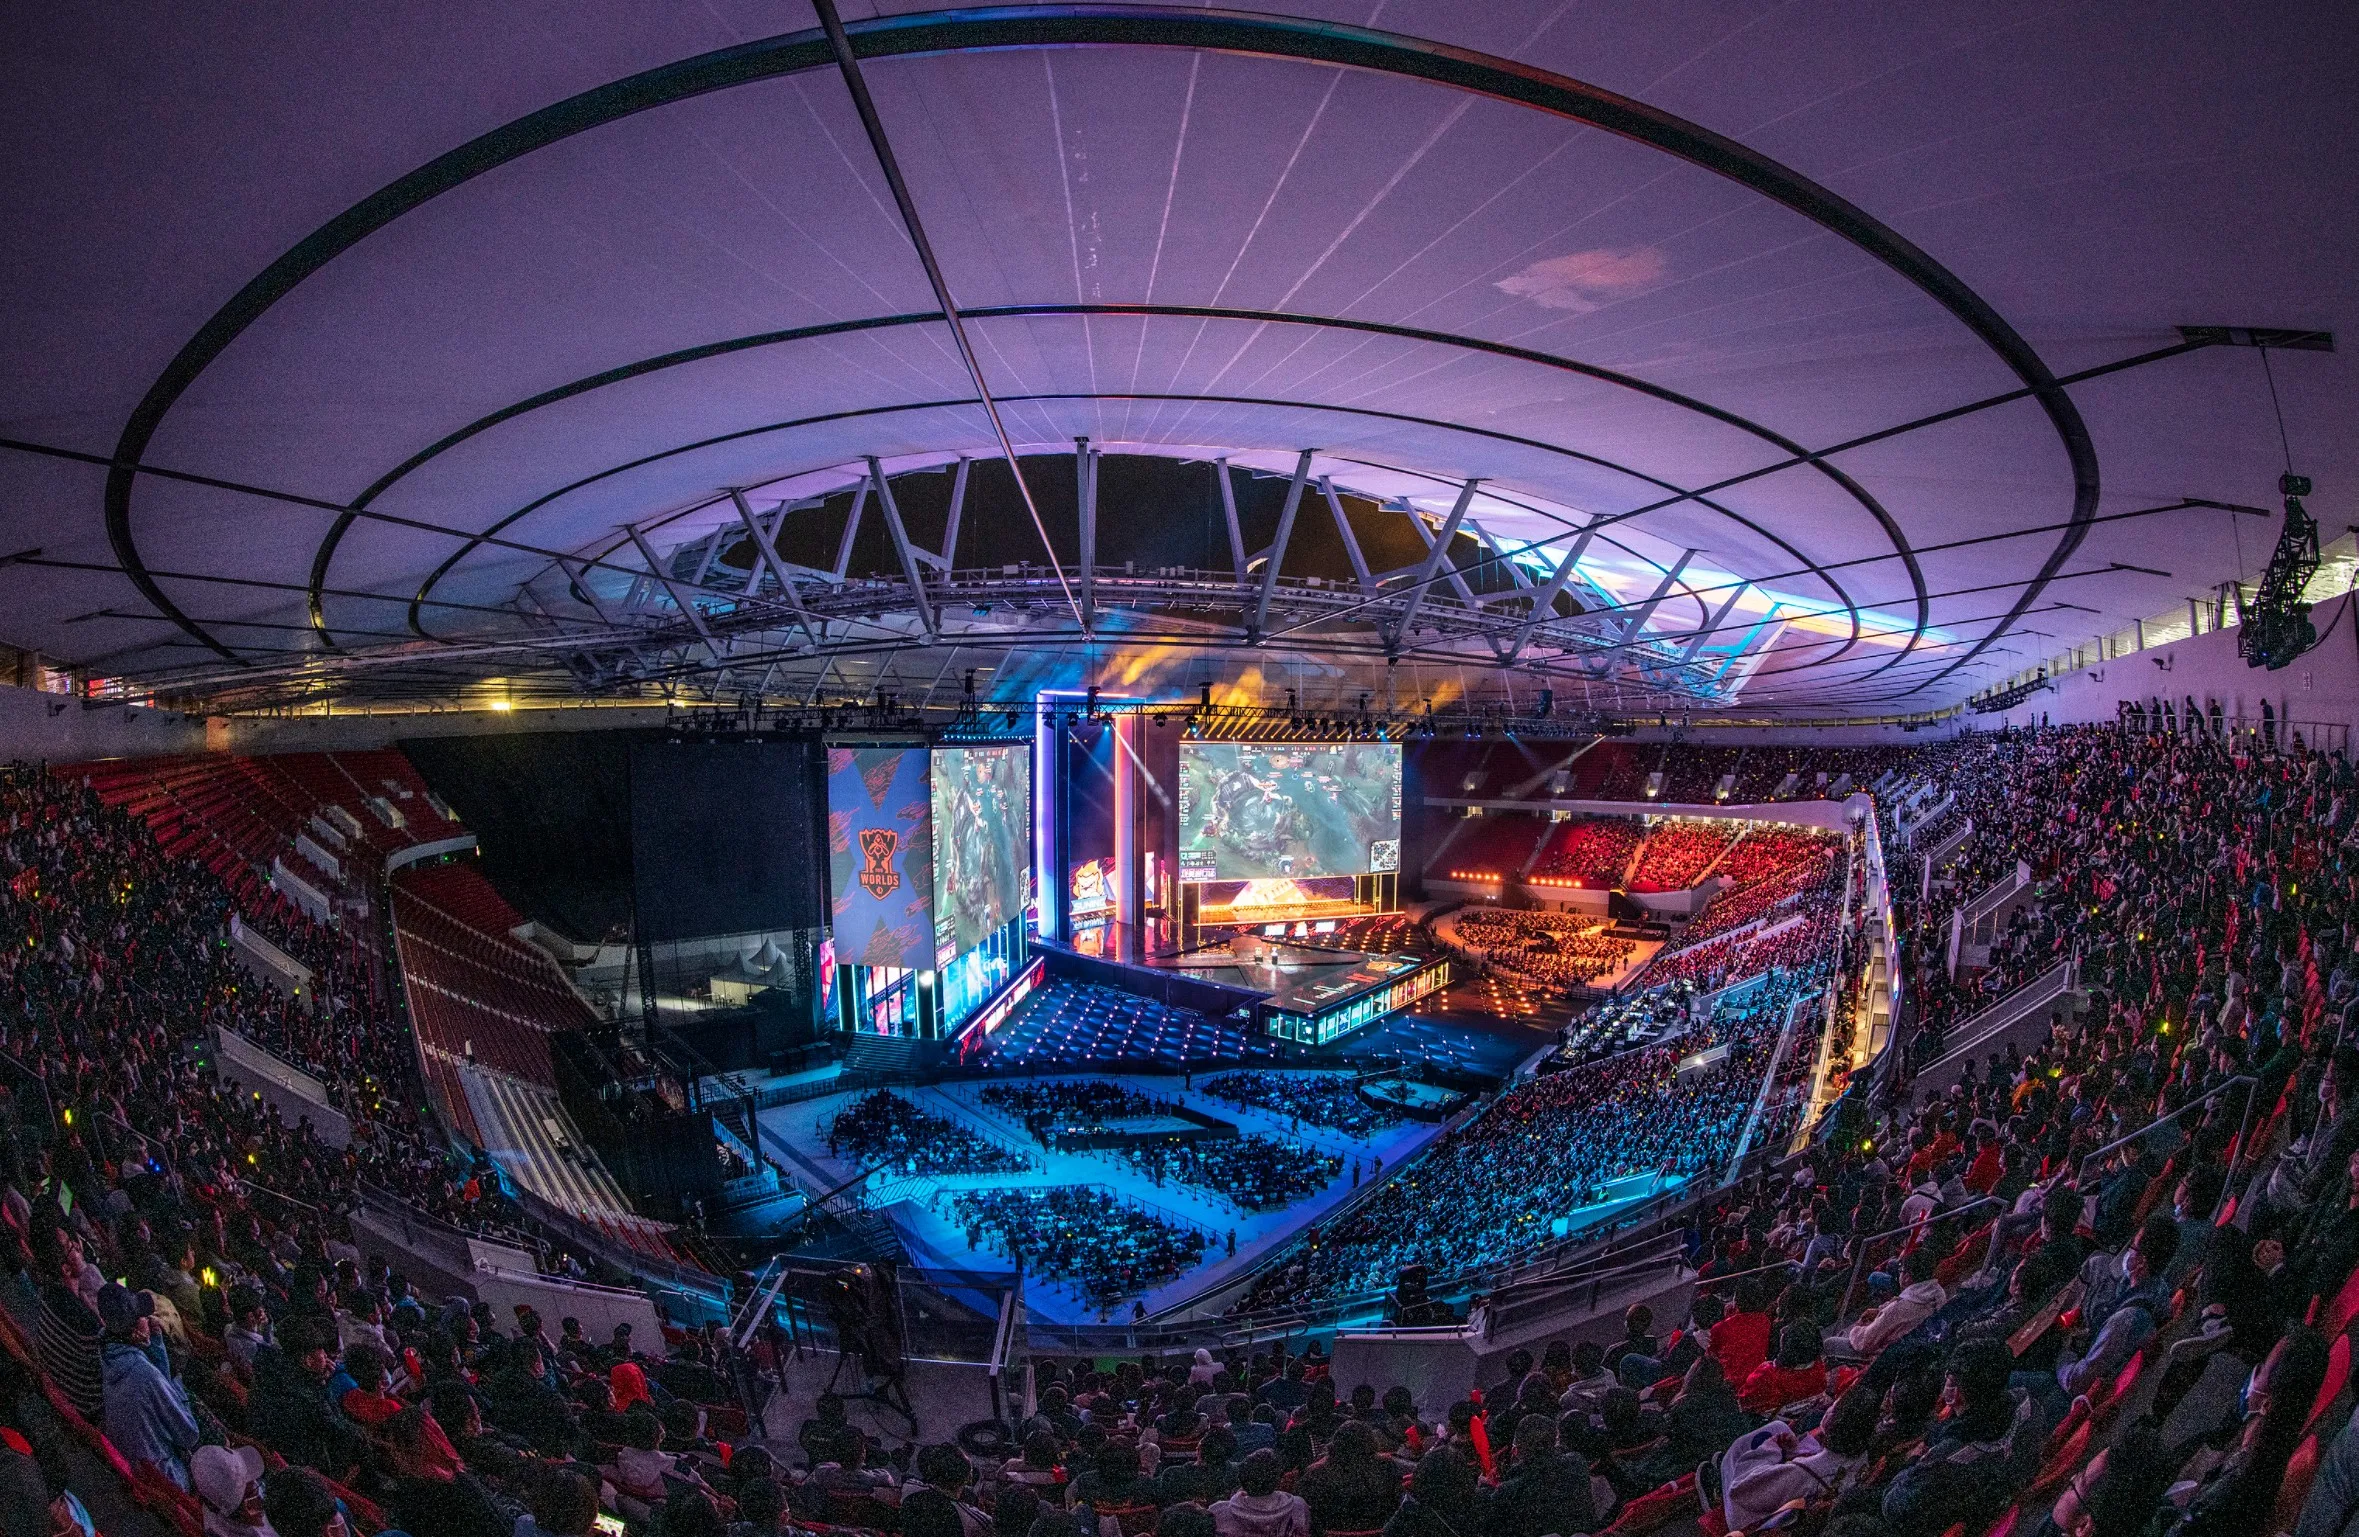 The 2021 League of Legends World Championship has reportedly been moved from China to Europe